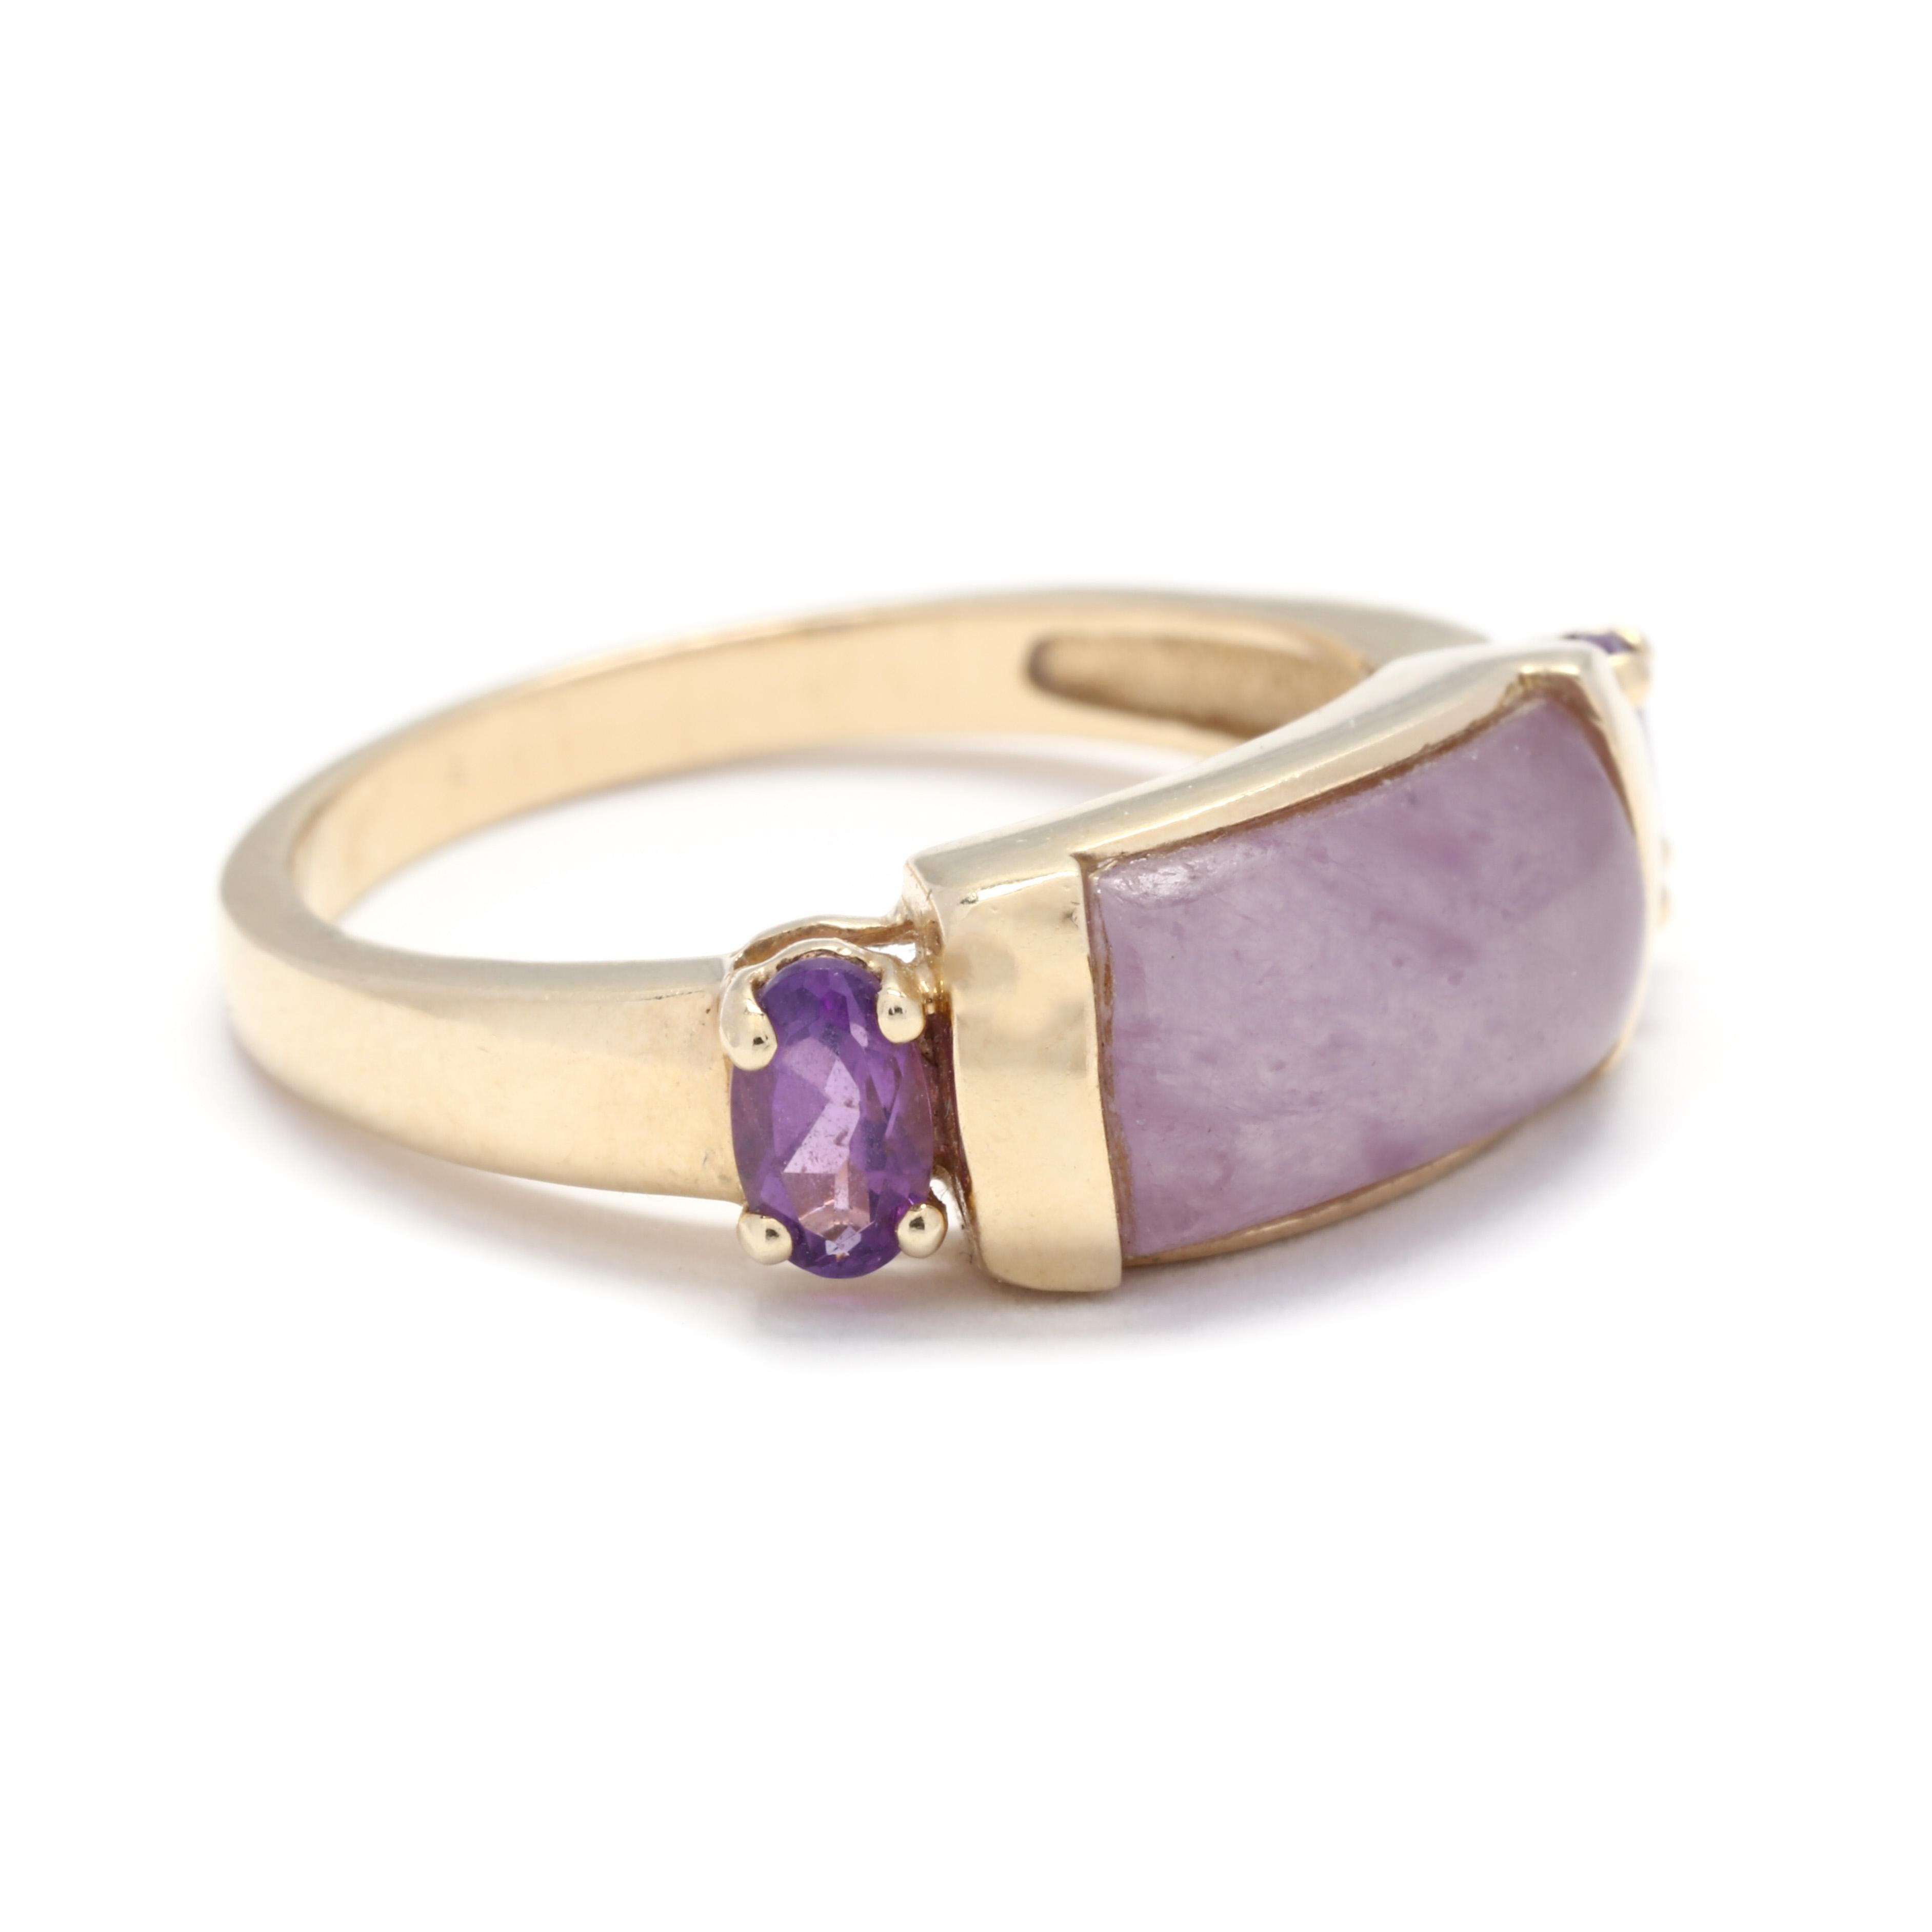 A vintage 14 karat yellow gold lavender jade and amethyst band ring. This ring features a cabochon rectangular lavender jade center stone with a prong set oval cut amethyst stone to either side and a slightly tapered band.



Stones:

- lavender